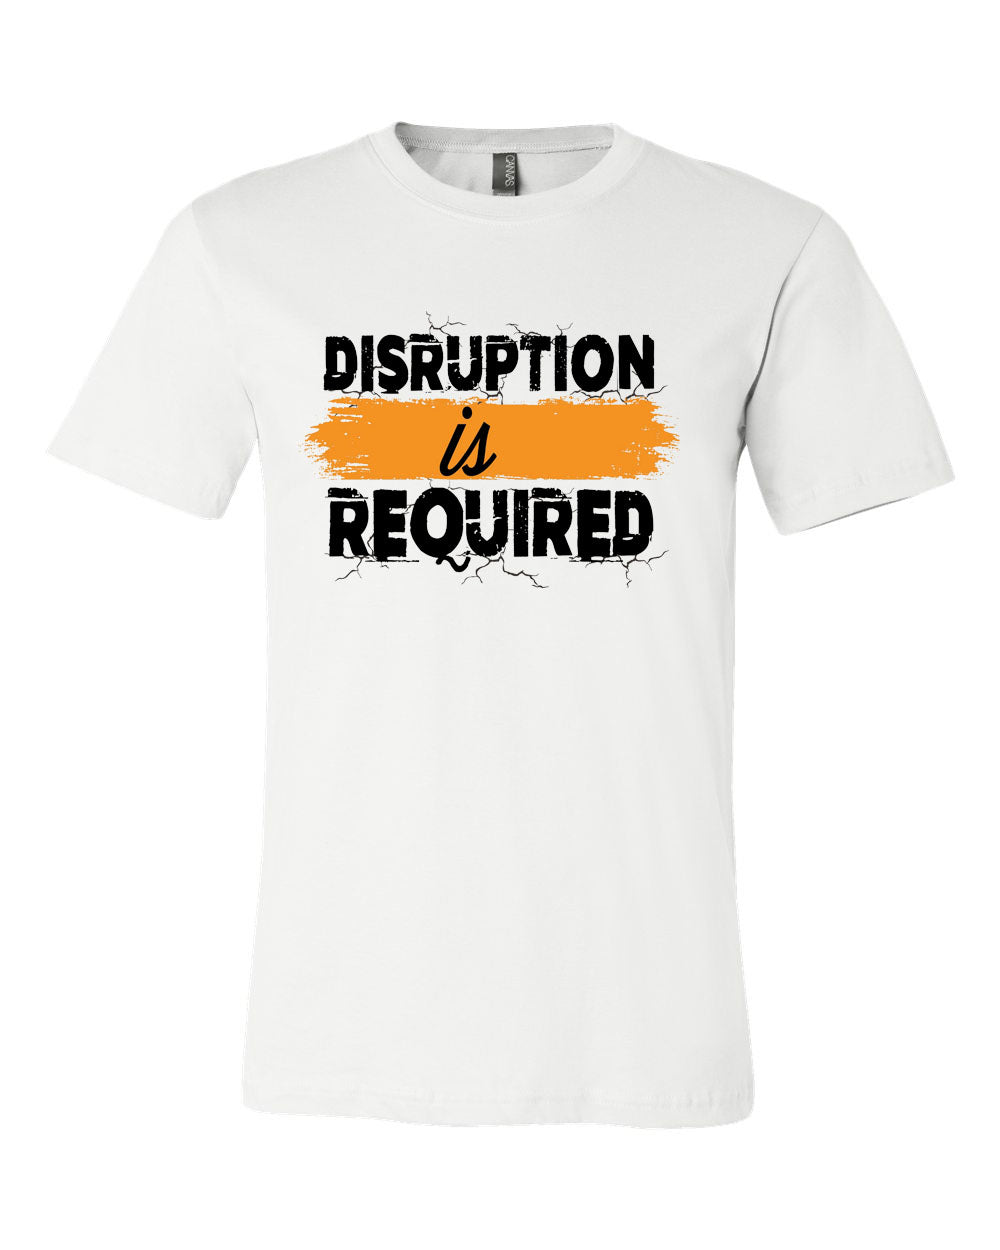 Sample Disruption is Required